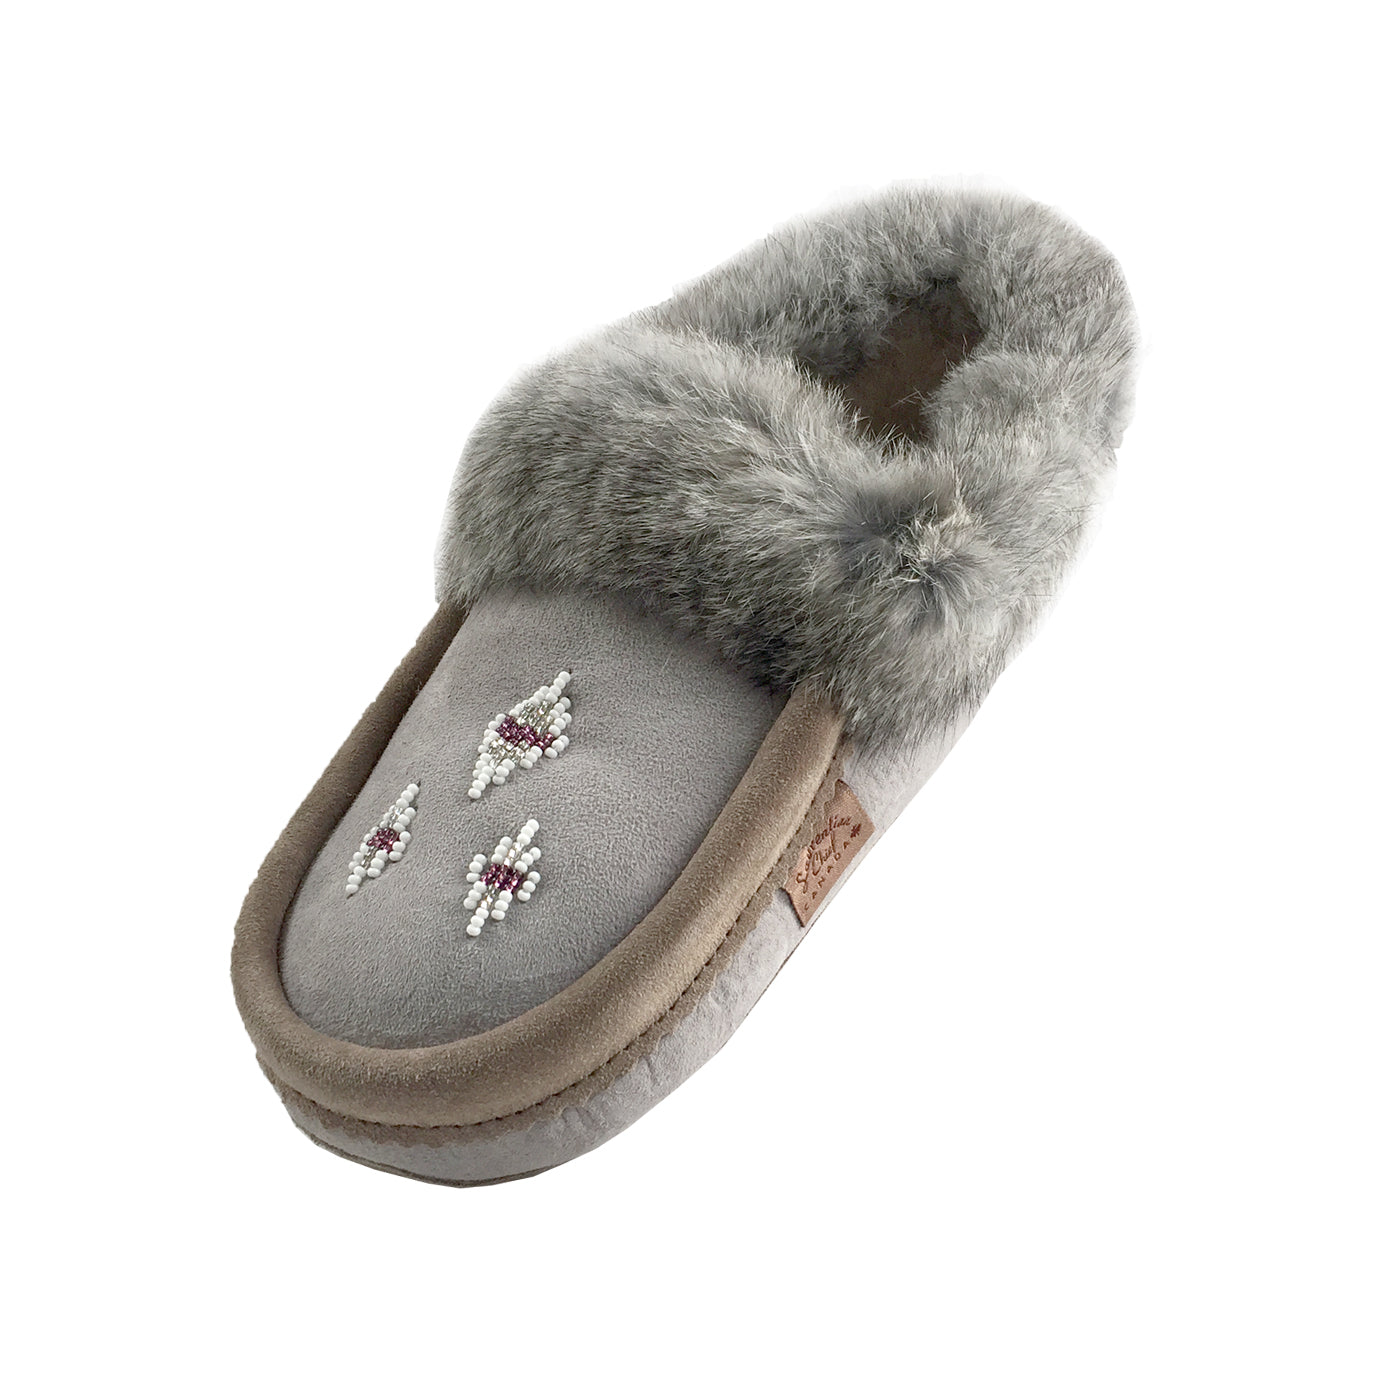 Men's Lined Genuine Suede Moccasin Slippers with Real Rabbit Fur